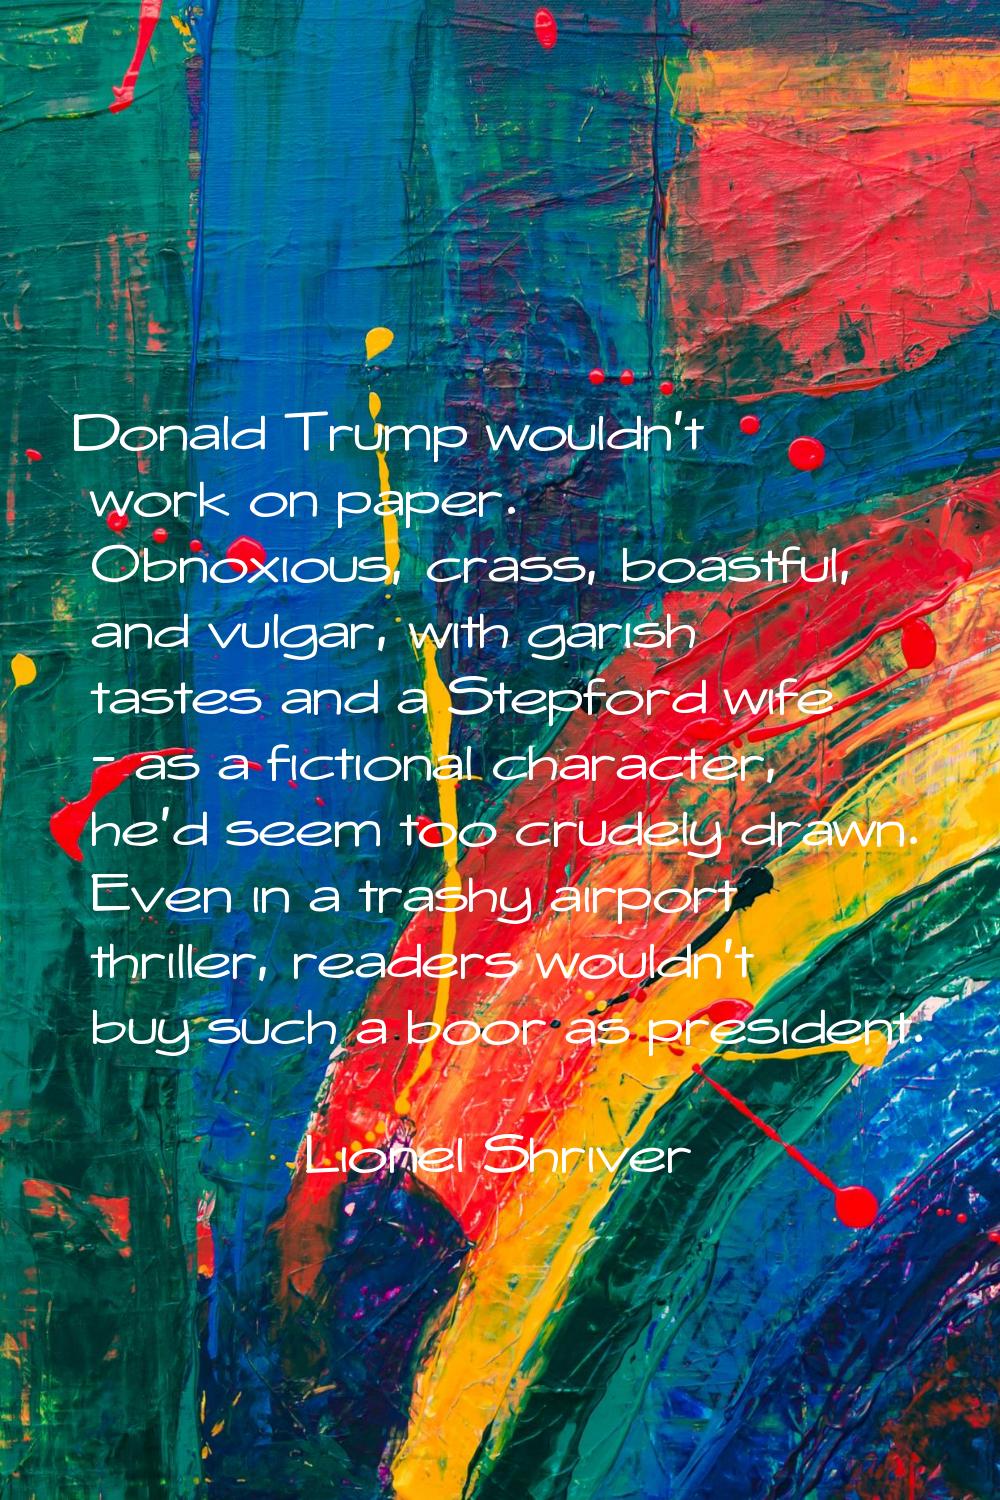 Donald Trump wouldn't work on paper. Obnoxious, crass, boastful, and vulgar, with garish tastes and